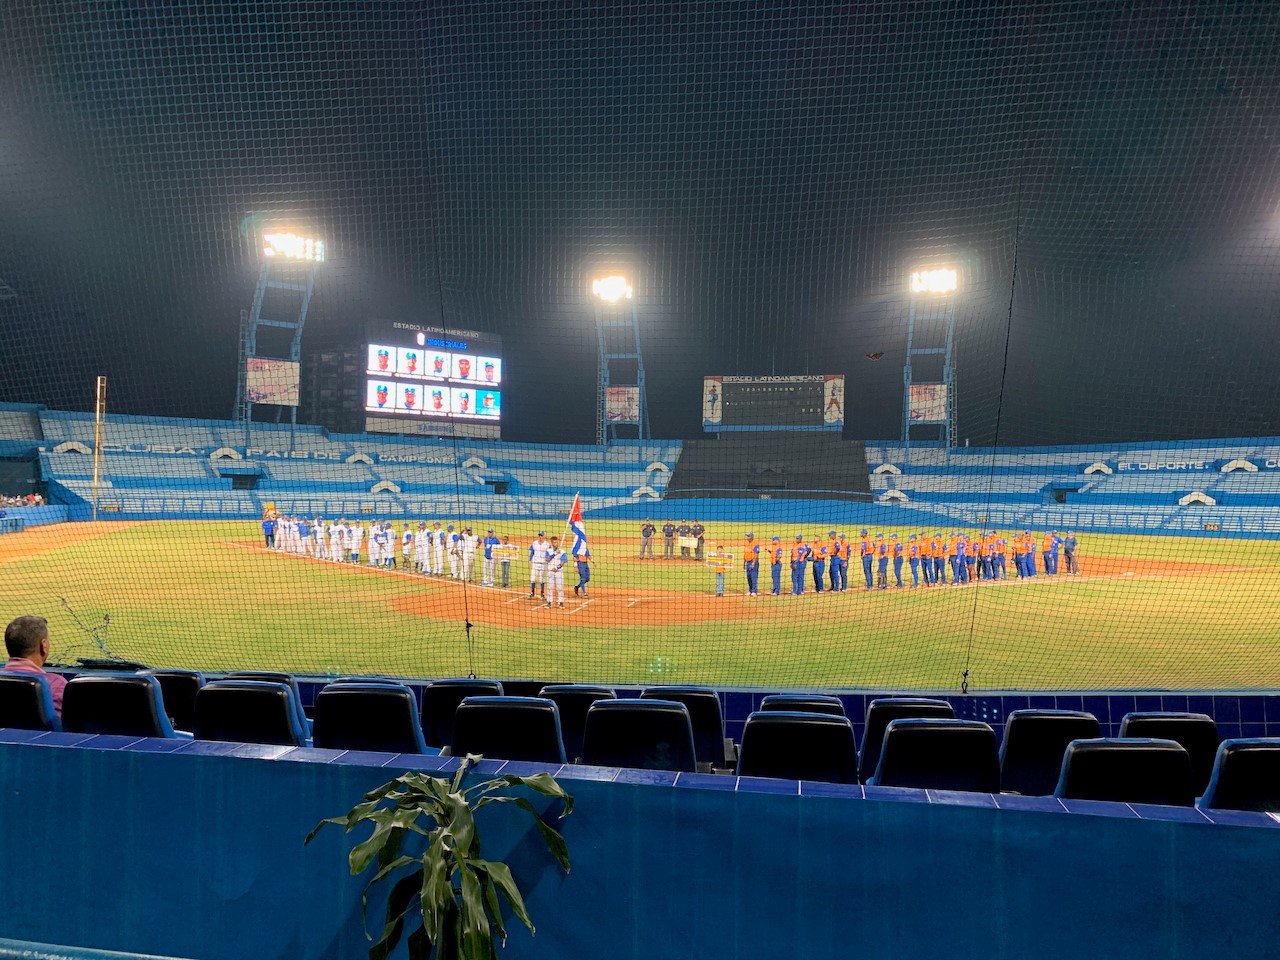 Cuban Baseball game and field picture